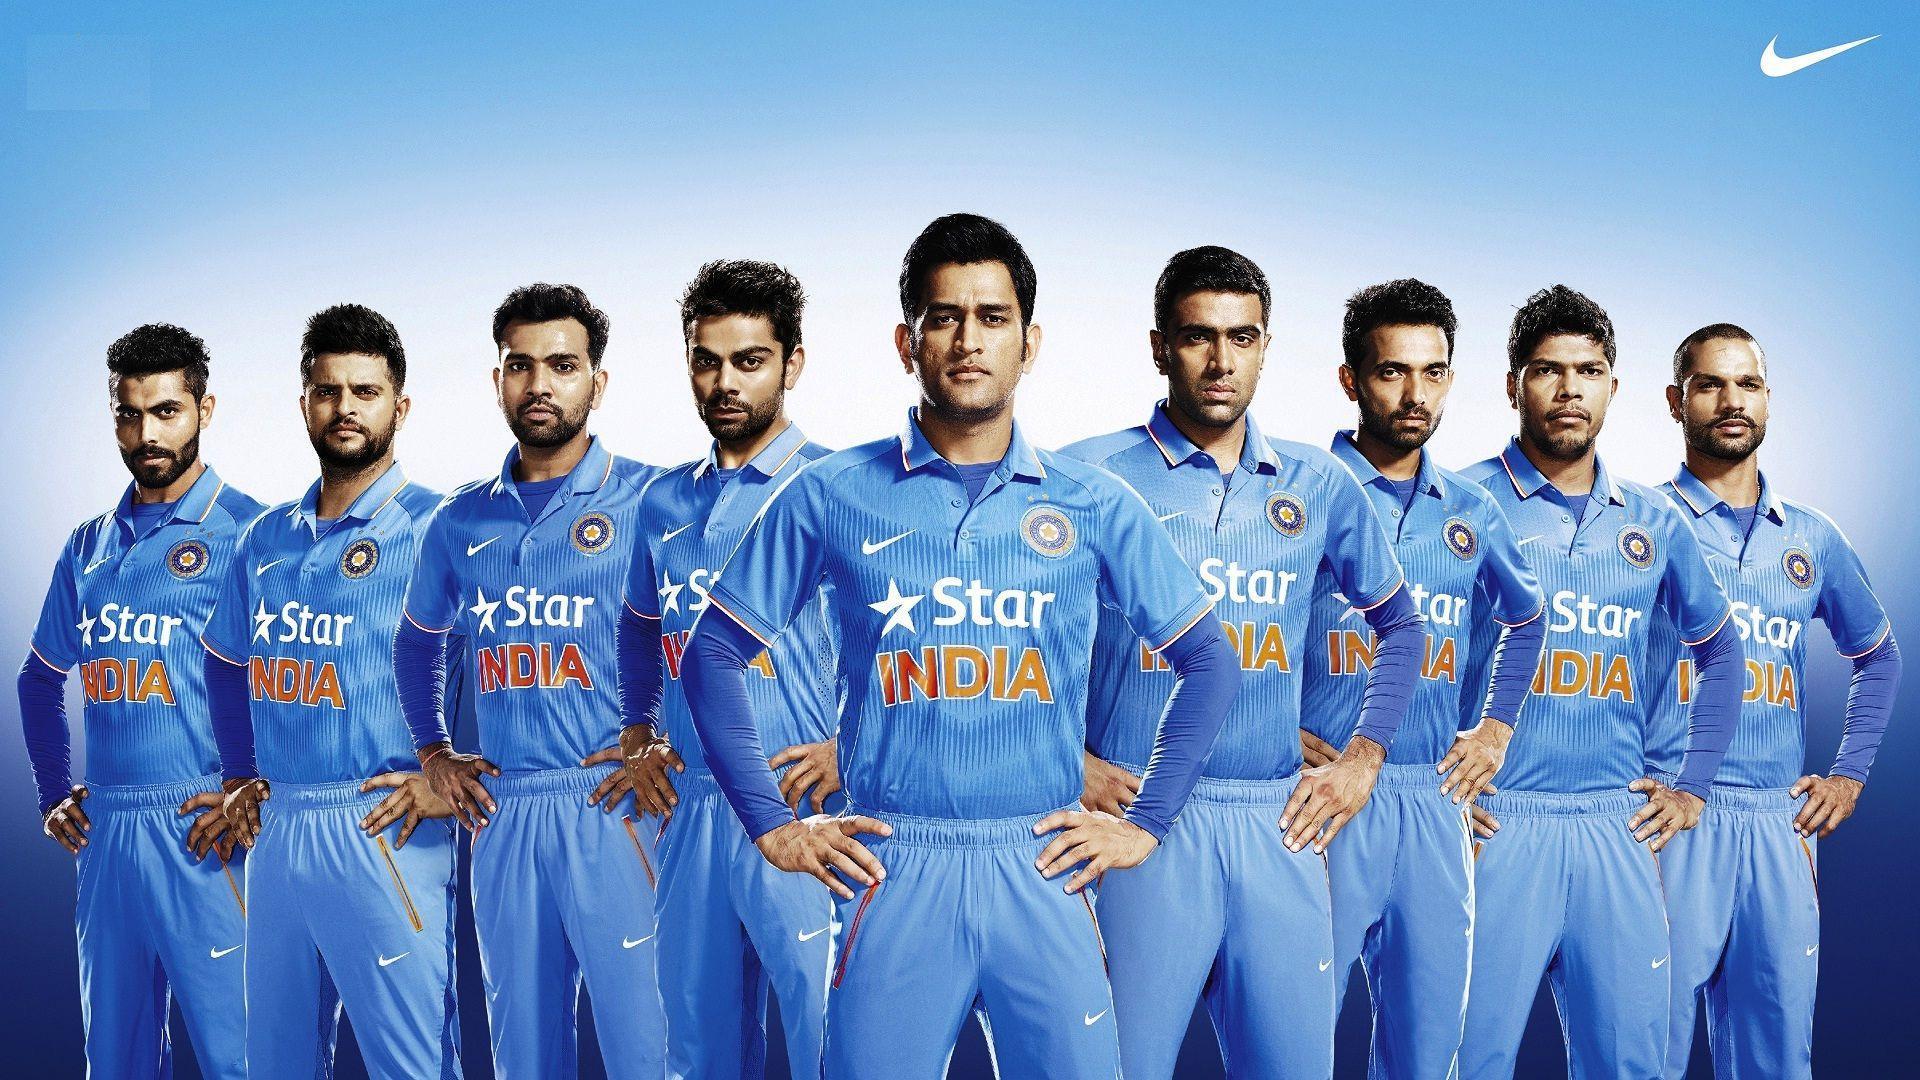 M S Dhoni With Indian Cricket Team Wallpaper Cricket